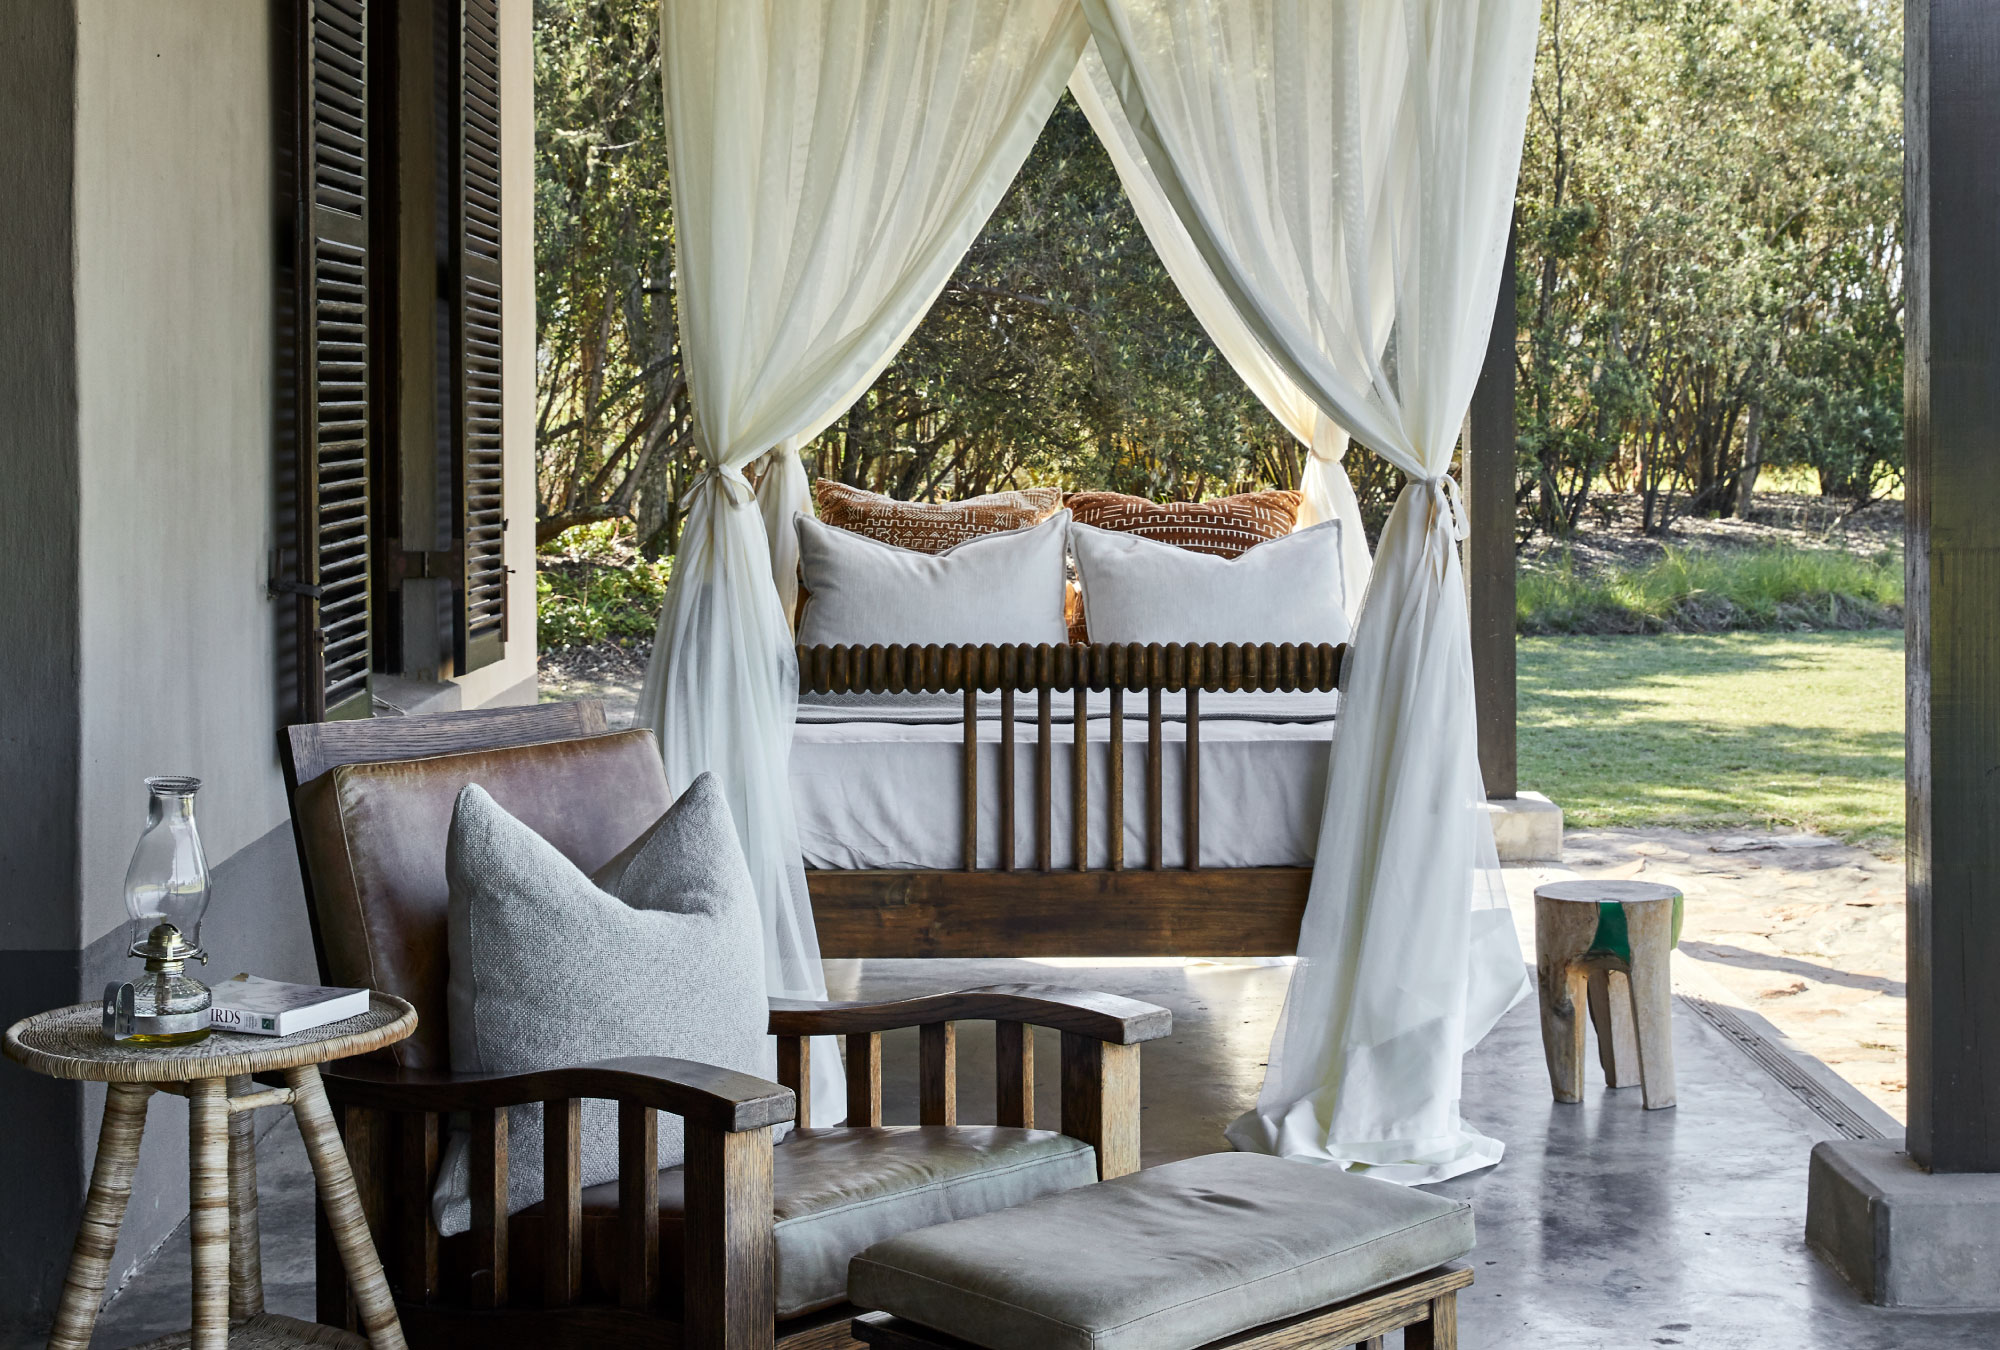 Weekday Wanderlust | Places: Bobbejaanskloof Private Nature Reserve, South Africa